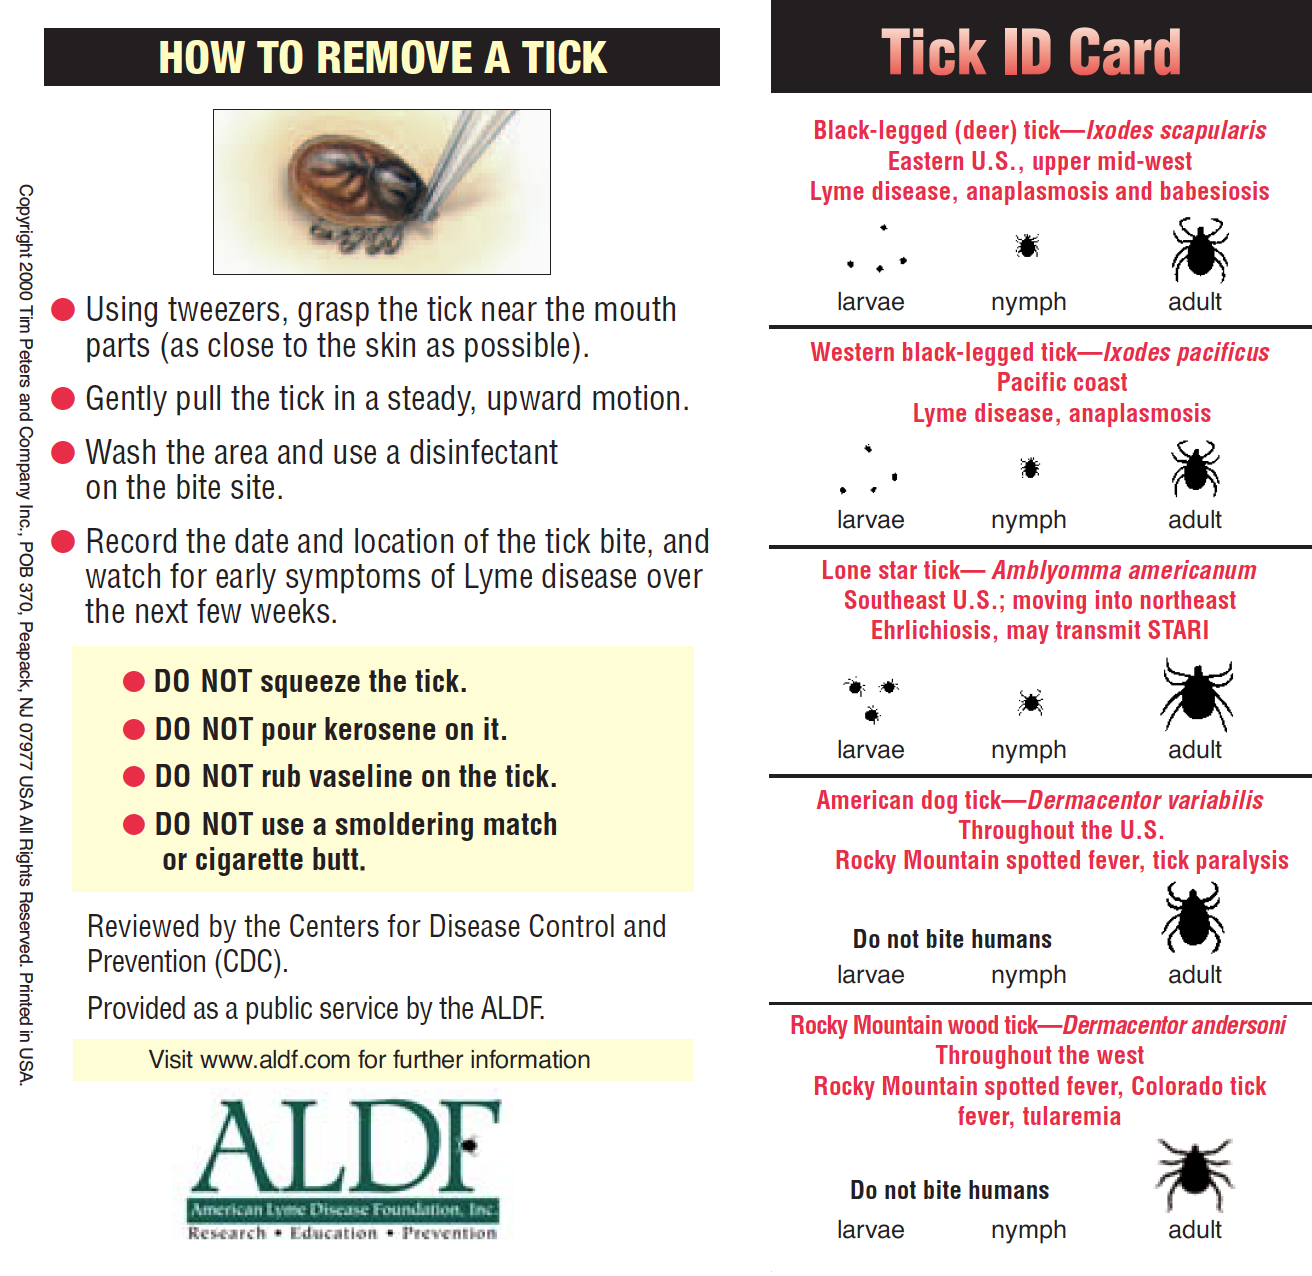 Tick Information & Removal 